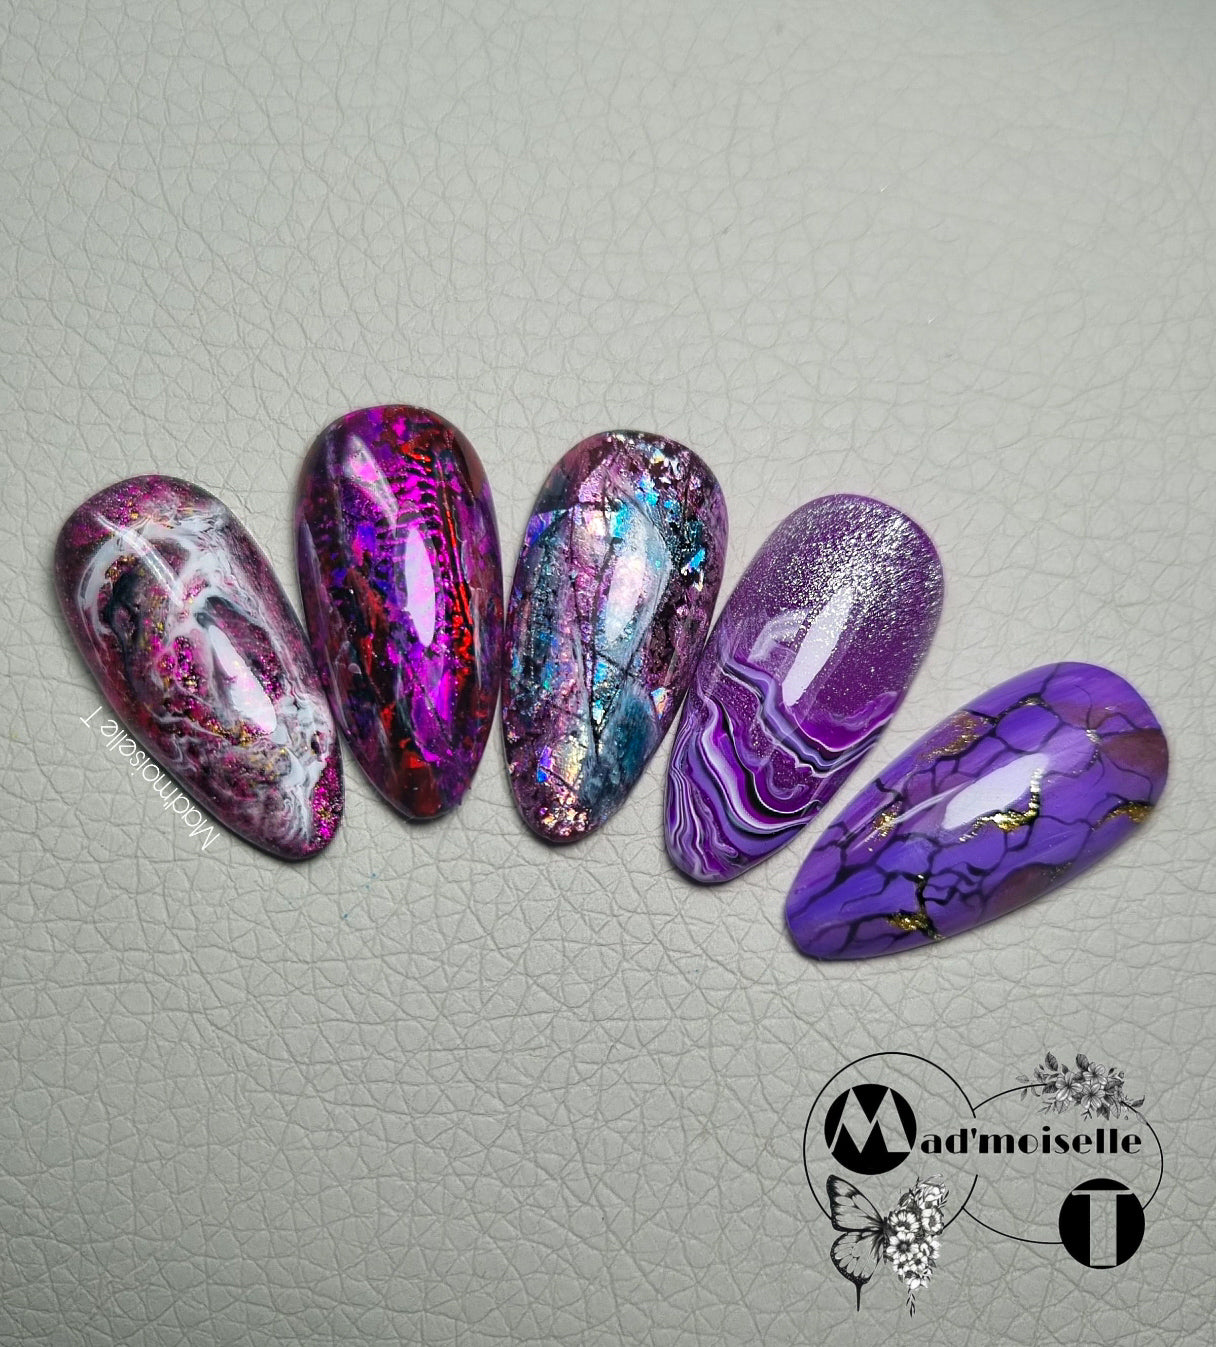 Formation Nail art technique STONE EFFECT - Mad’moiselle T Nail Shop